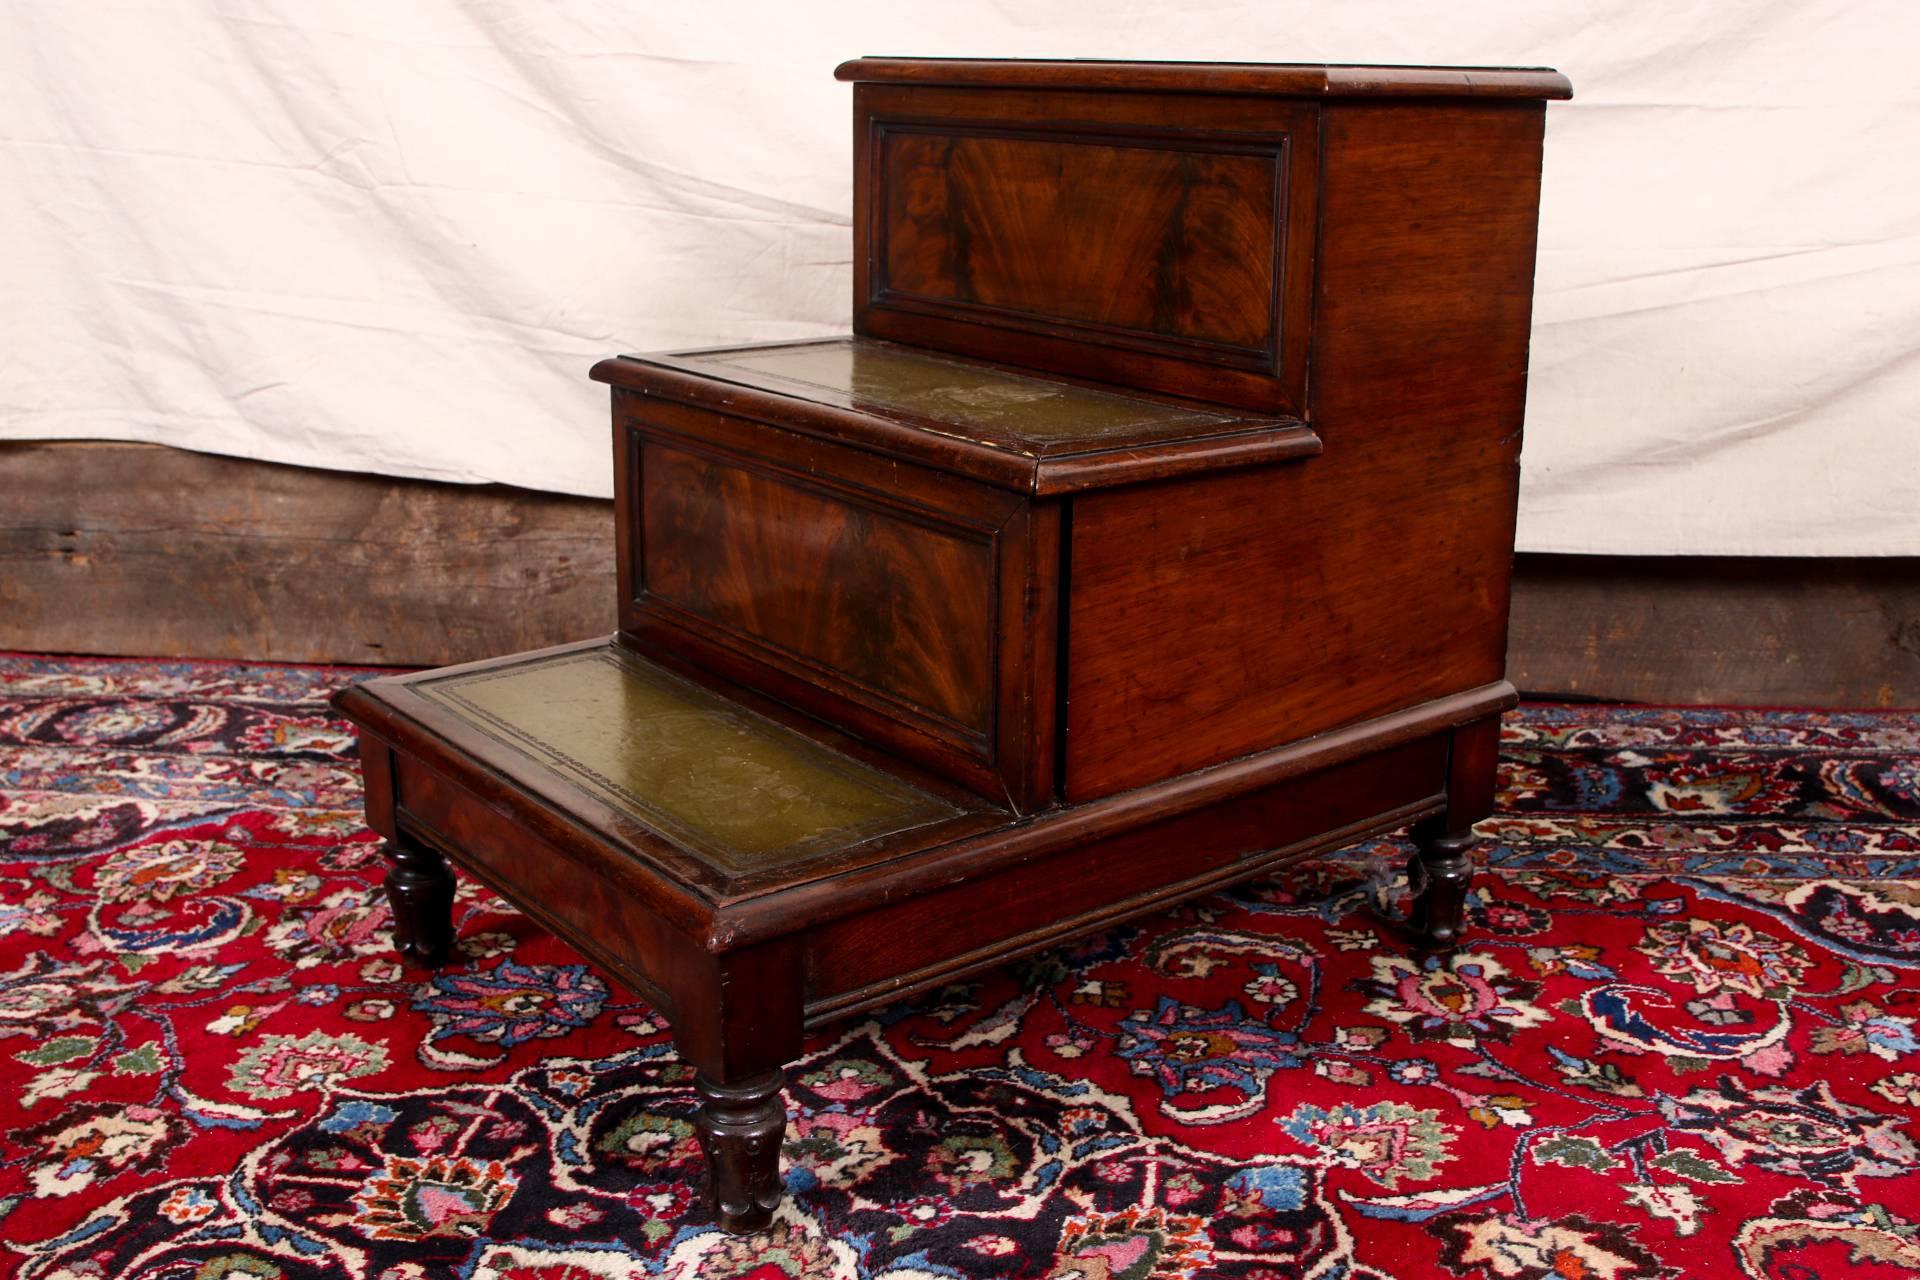 Antique English library stairs or bedside tables, circa 1840, walnut with three step tiers with burled carved recessed panels on front, green tooled leather tops and raised on finely carved leafy feet. The top lifts up. 

Condition: Expected wear